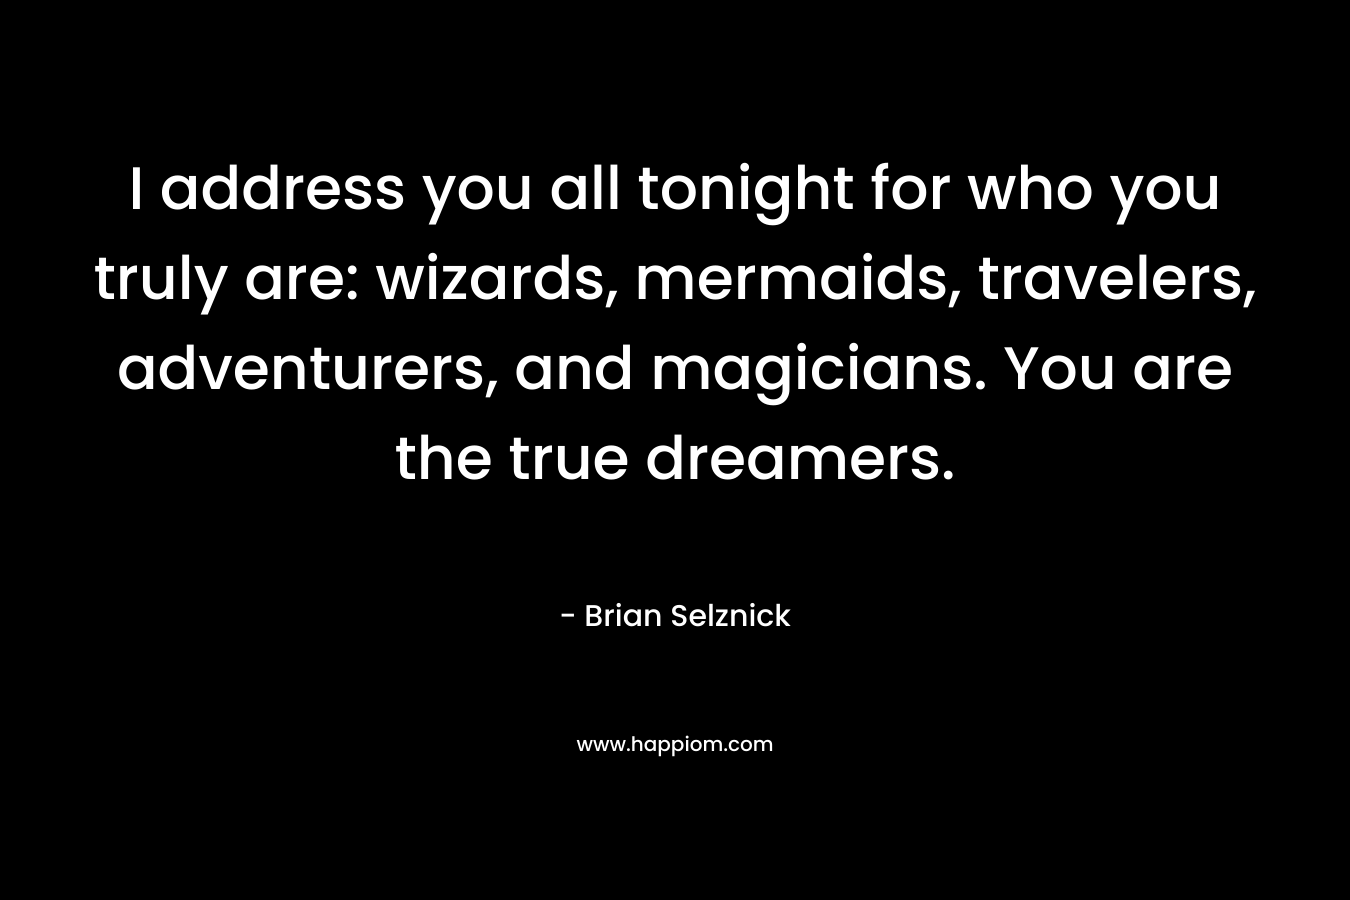 I address you all tonight for who you truly are: wizards, mermaids, travelers, adventurers, and magicians. You are the true dreamers. – Brian Selznick